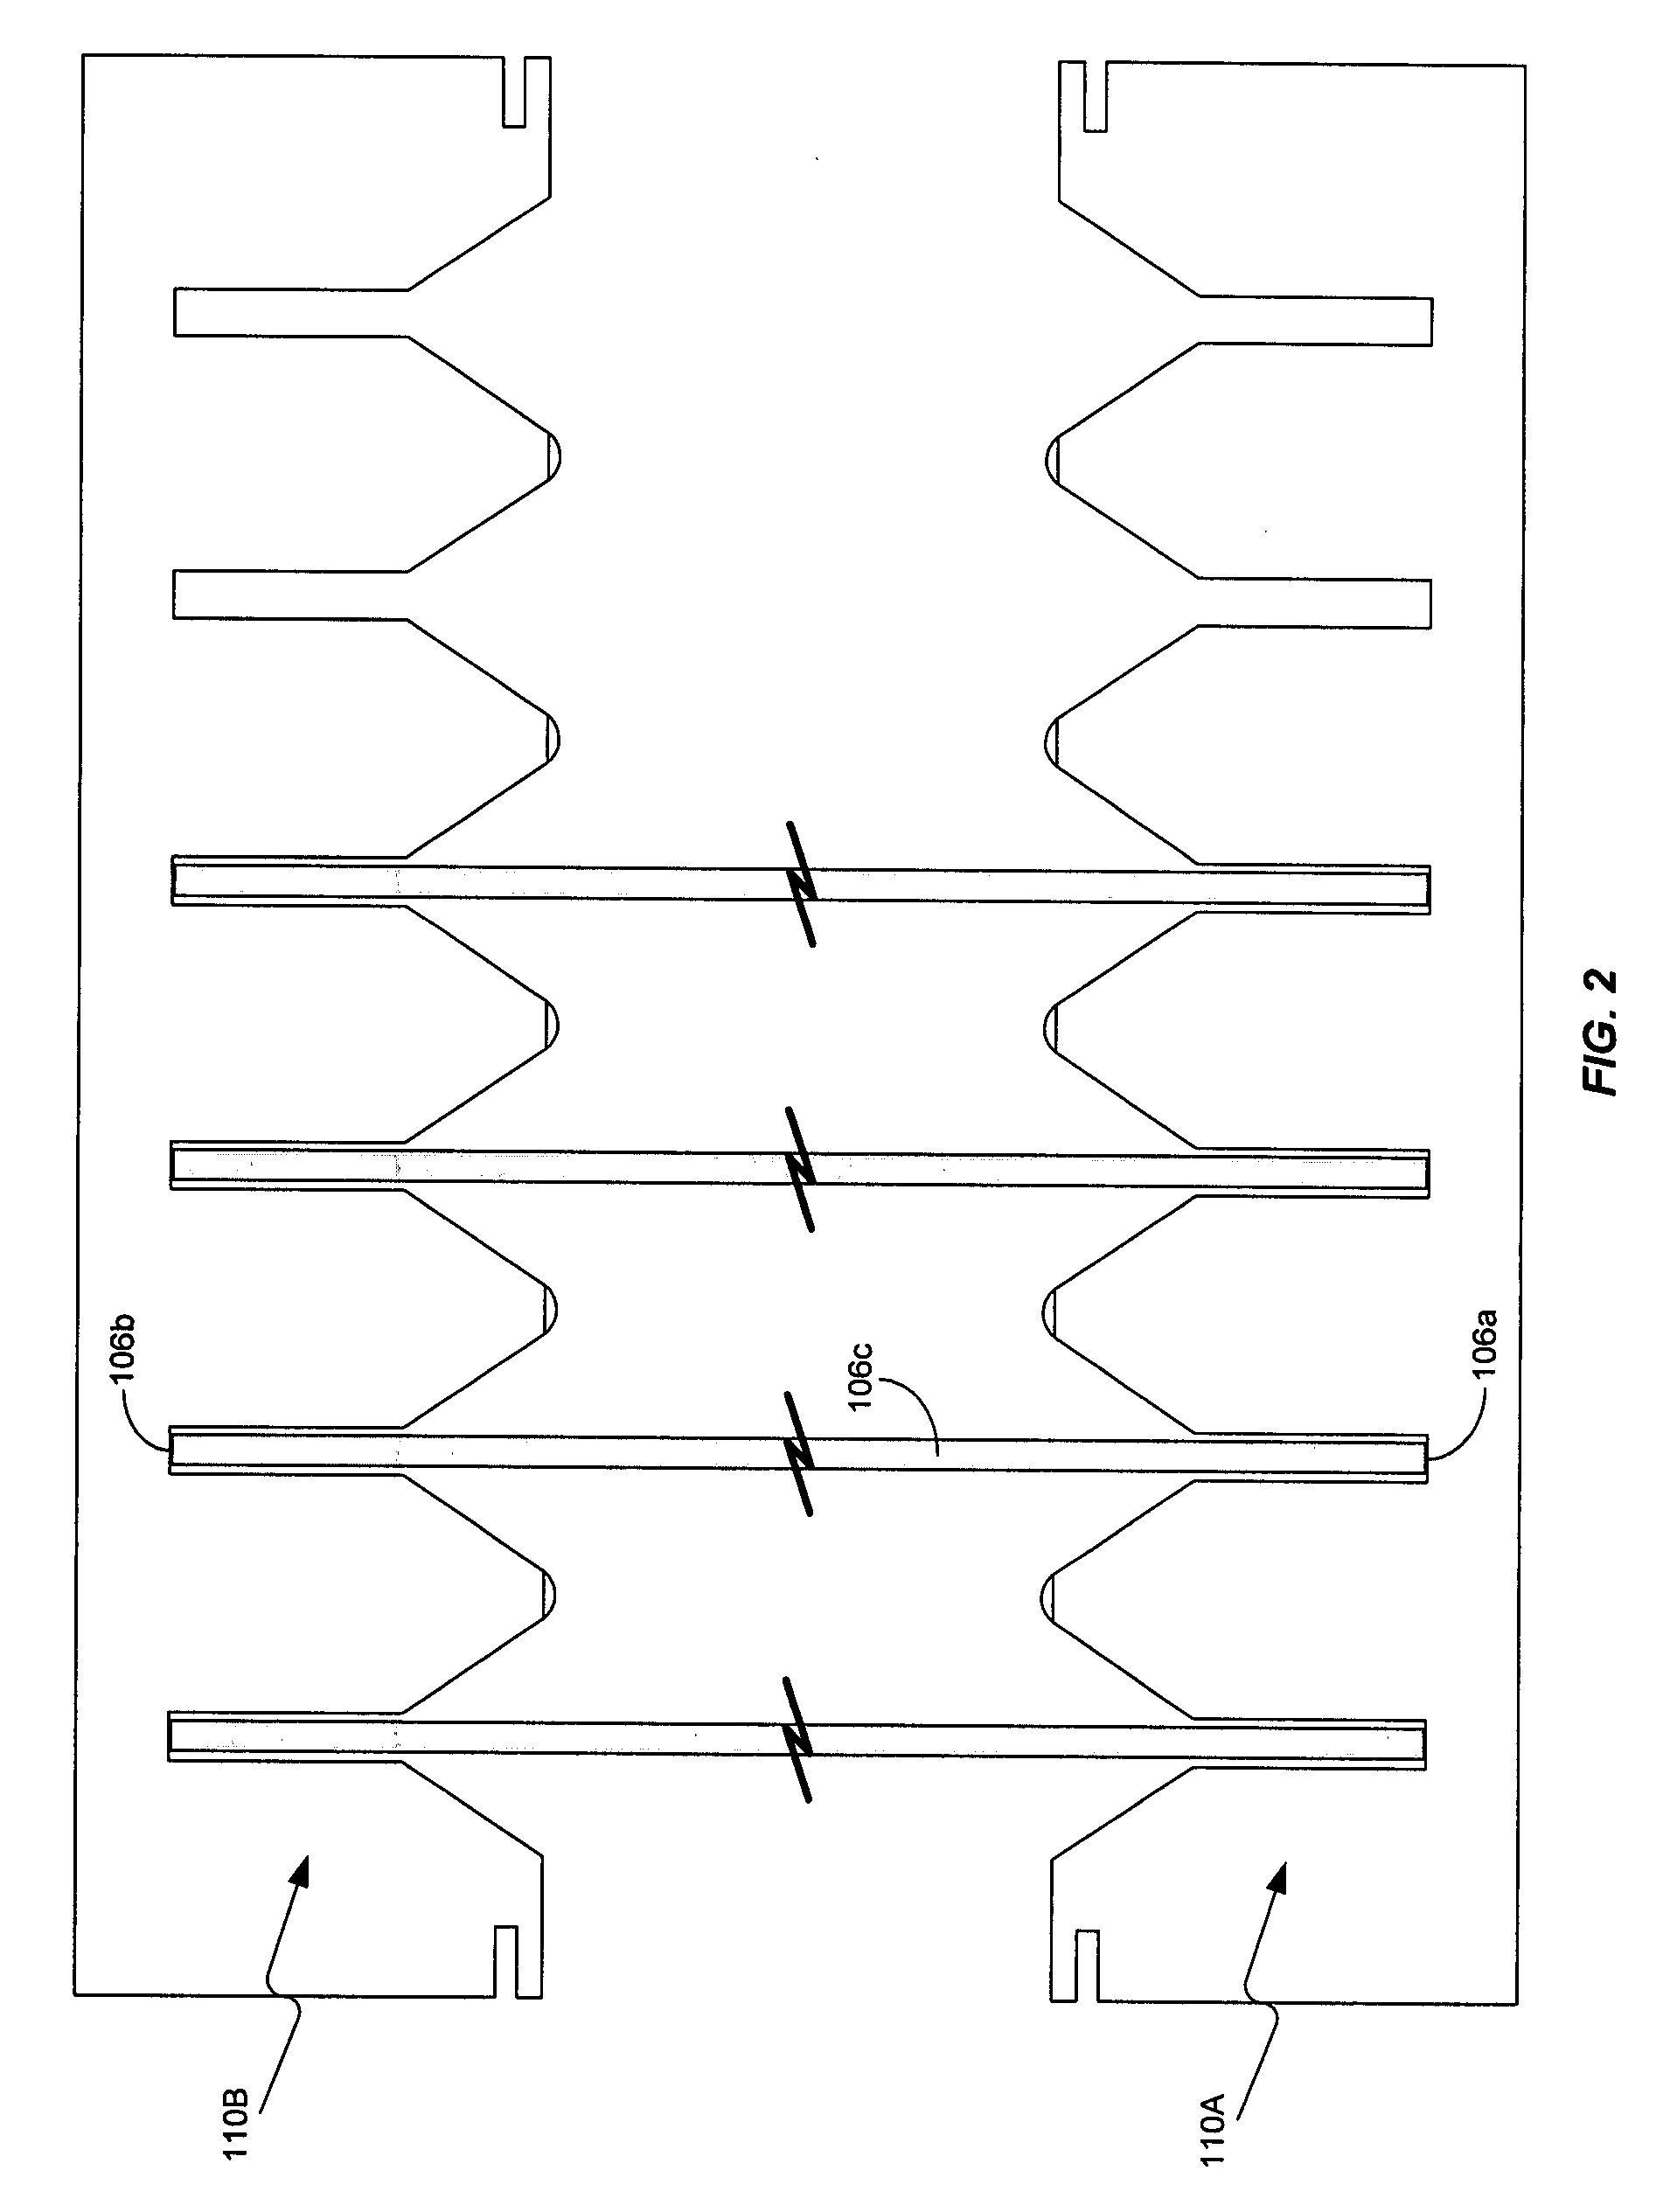 Support apparatus to maintain physical geometry of sheet glass and methods of using same